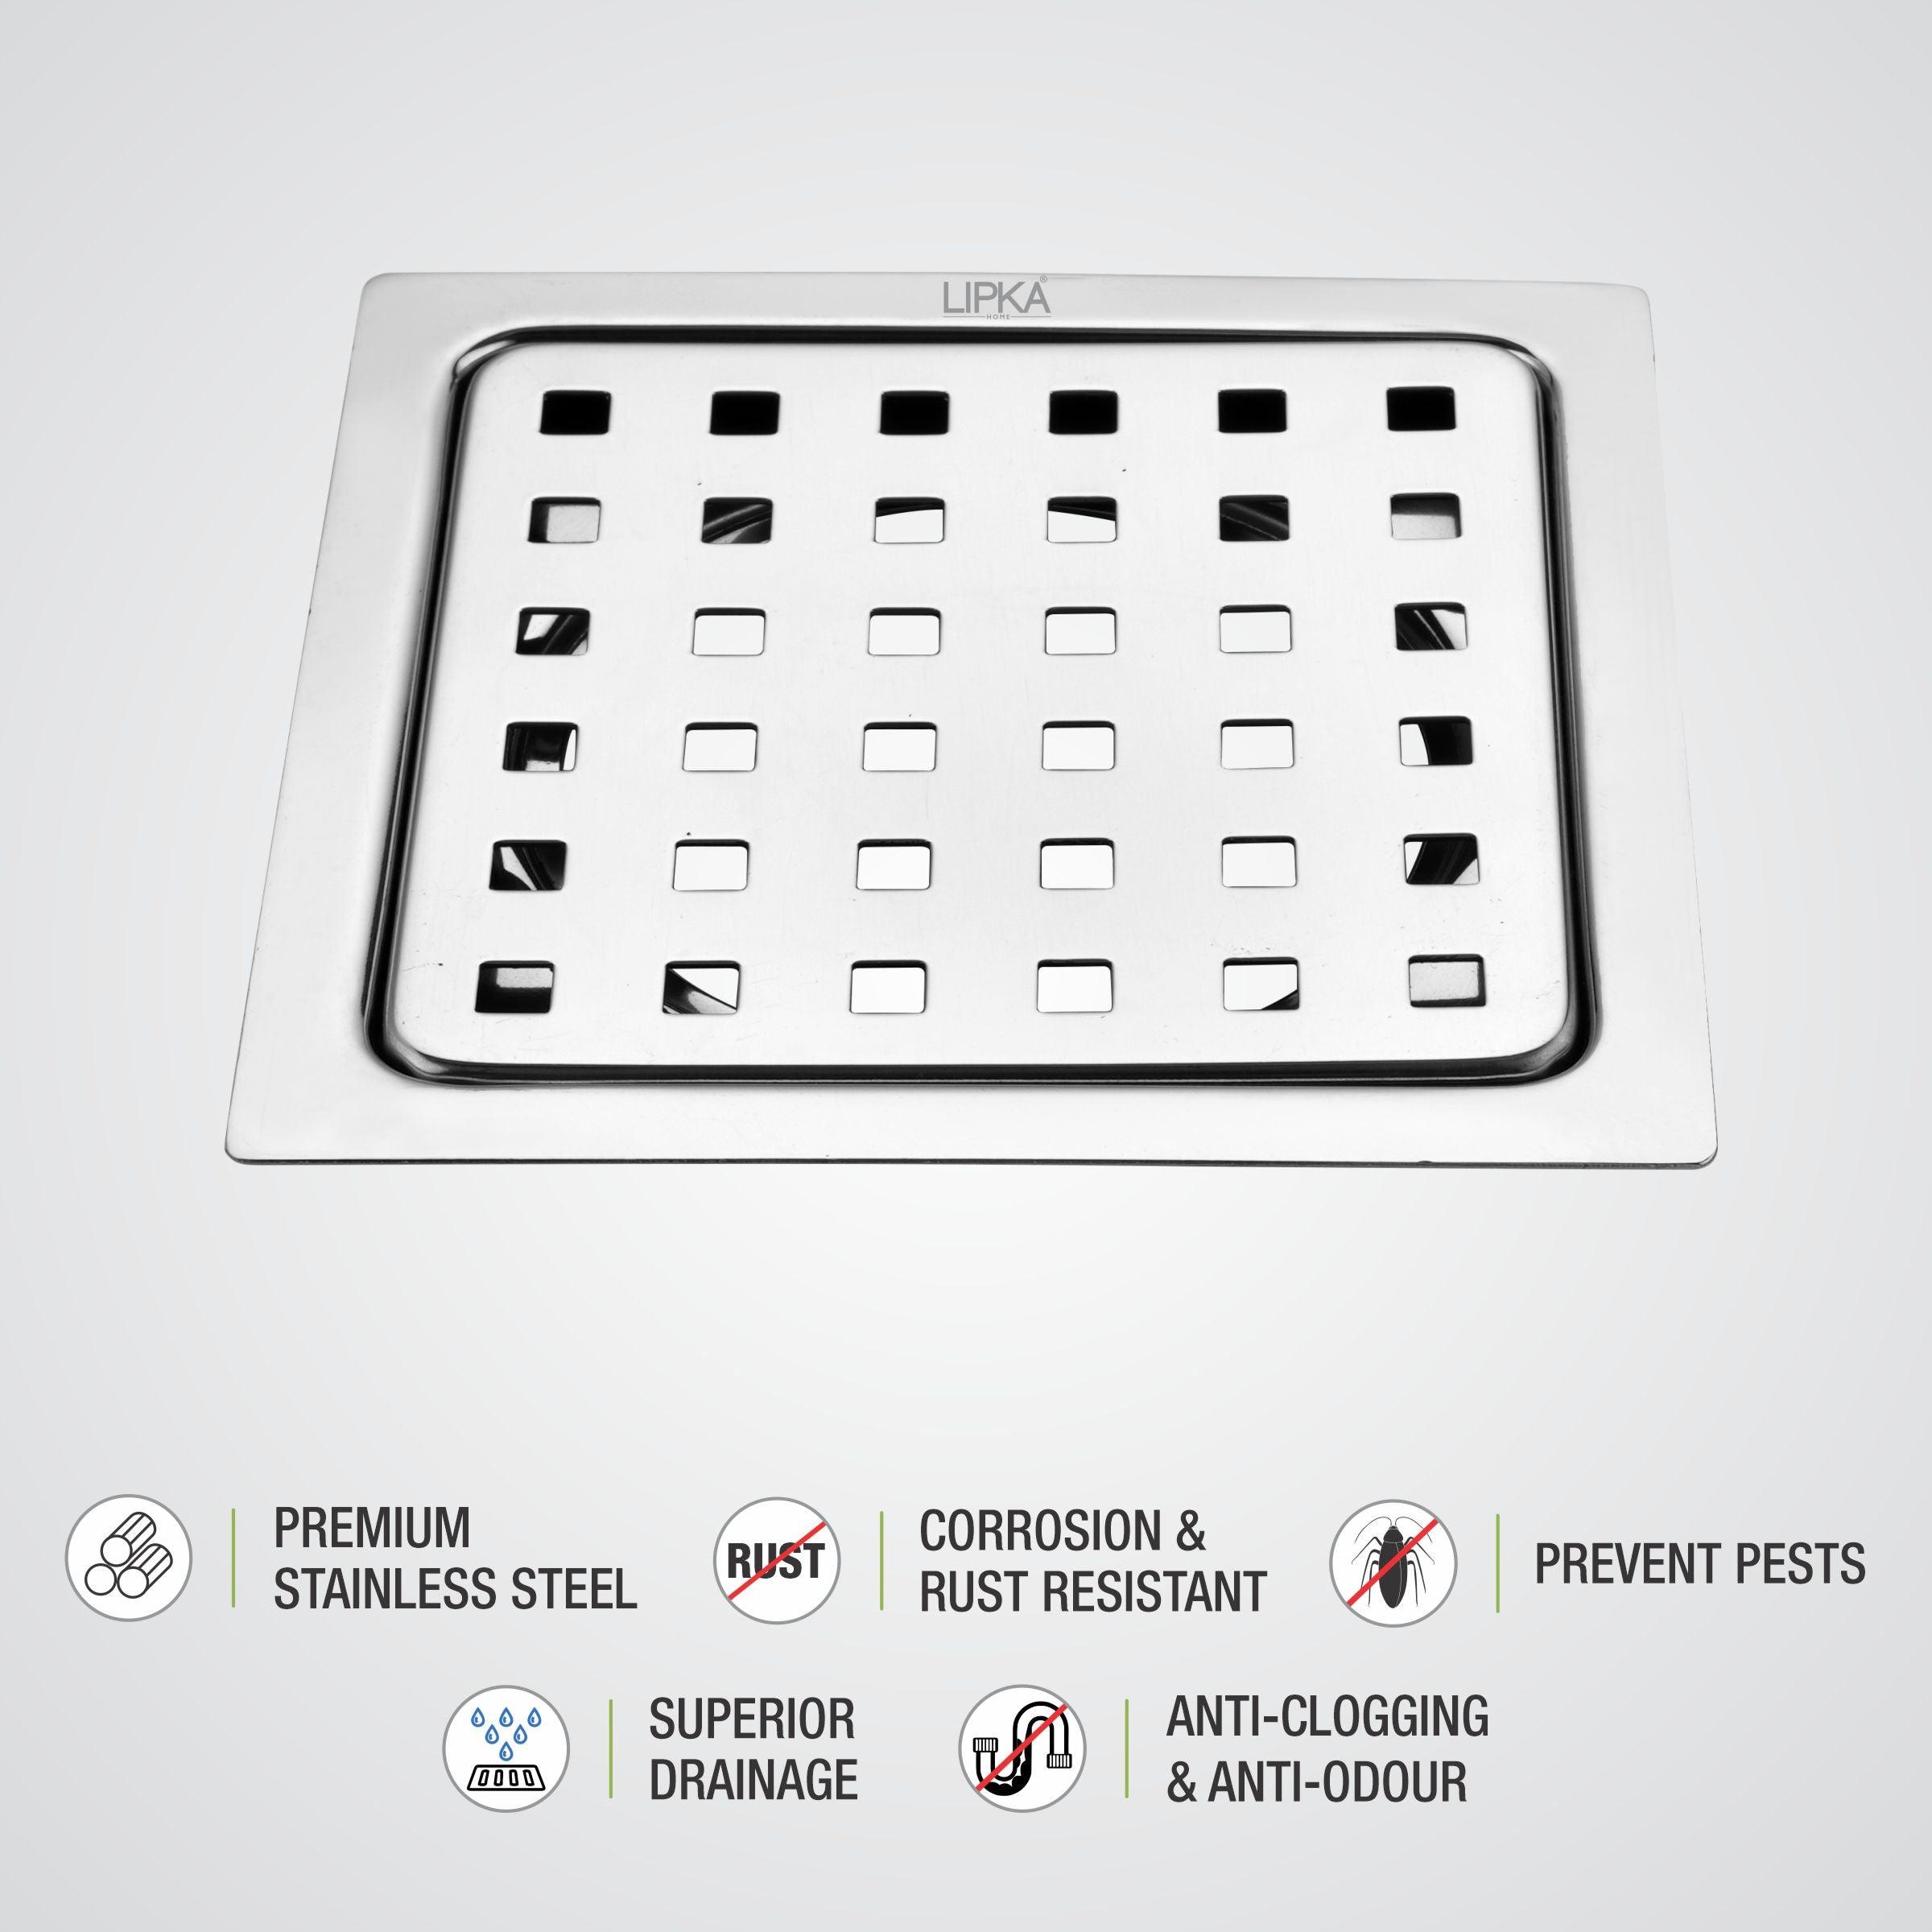 YU Square Floor Drain (5 x 5 Inches) features